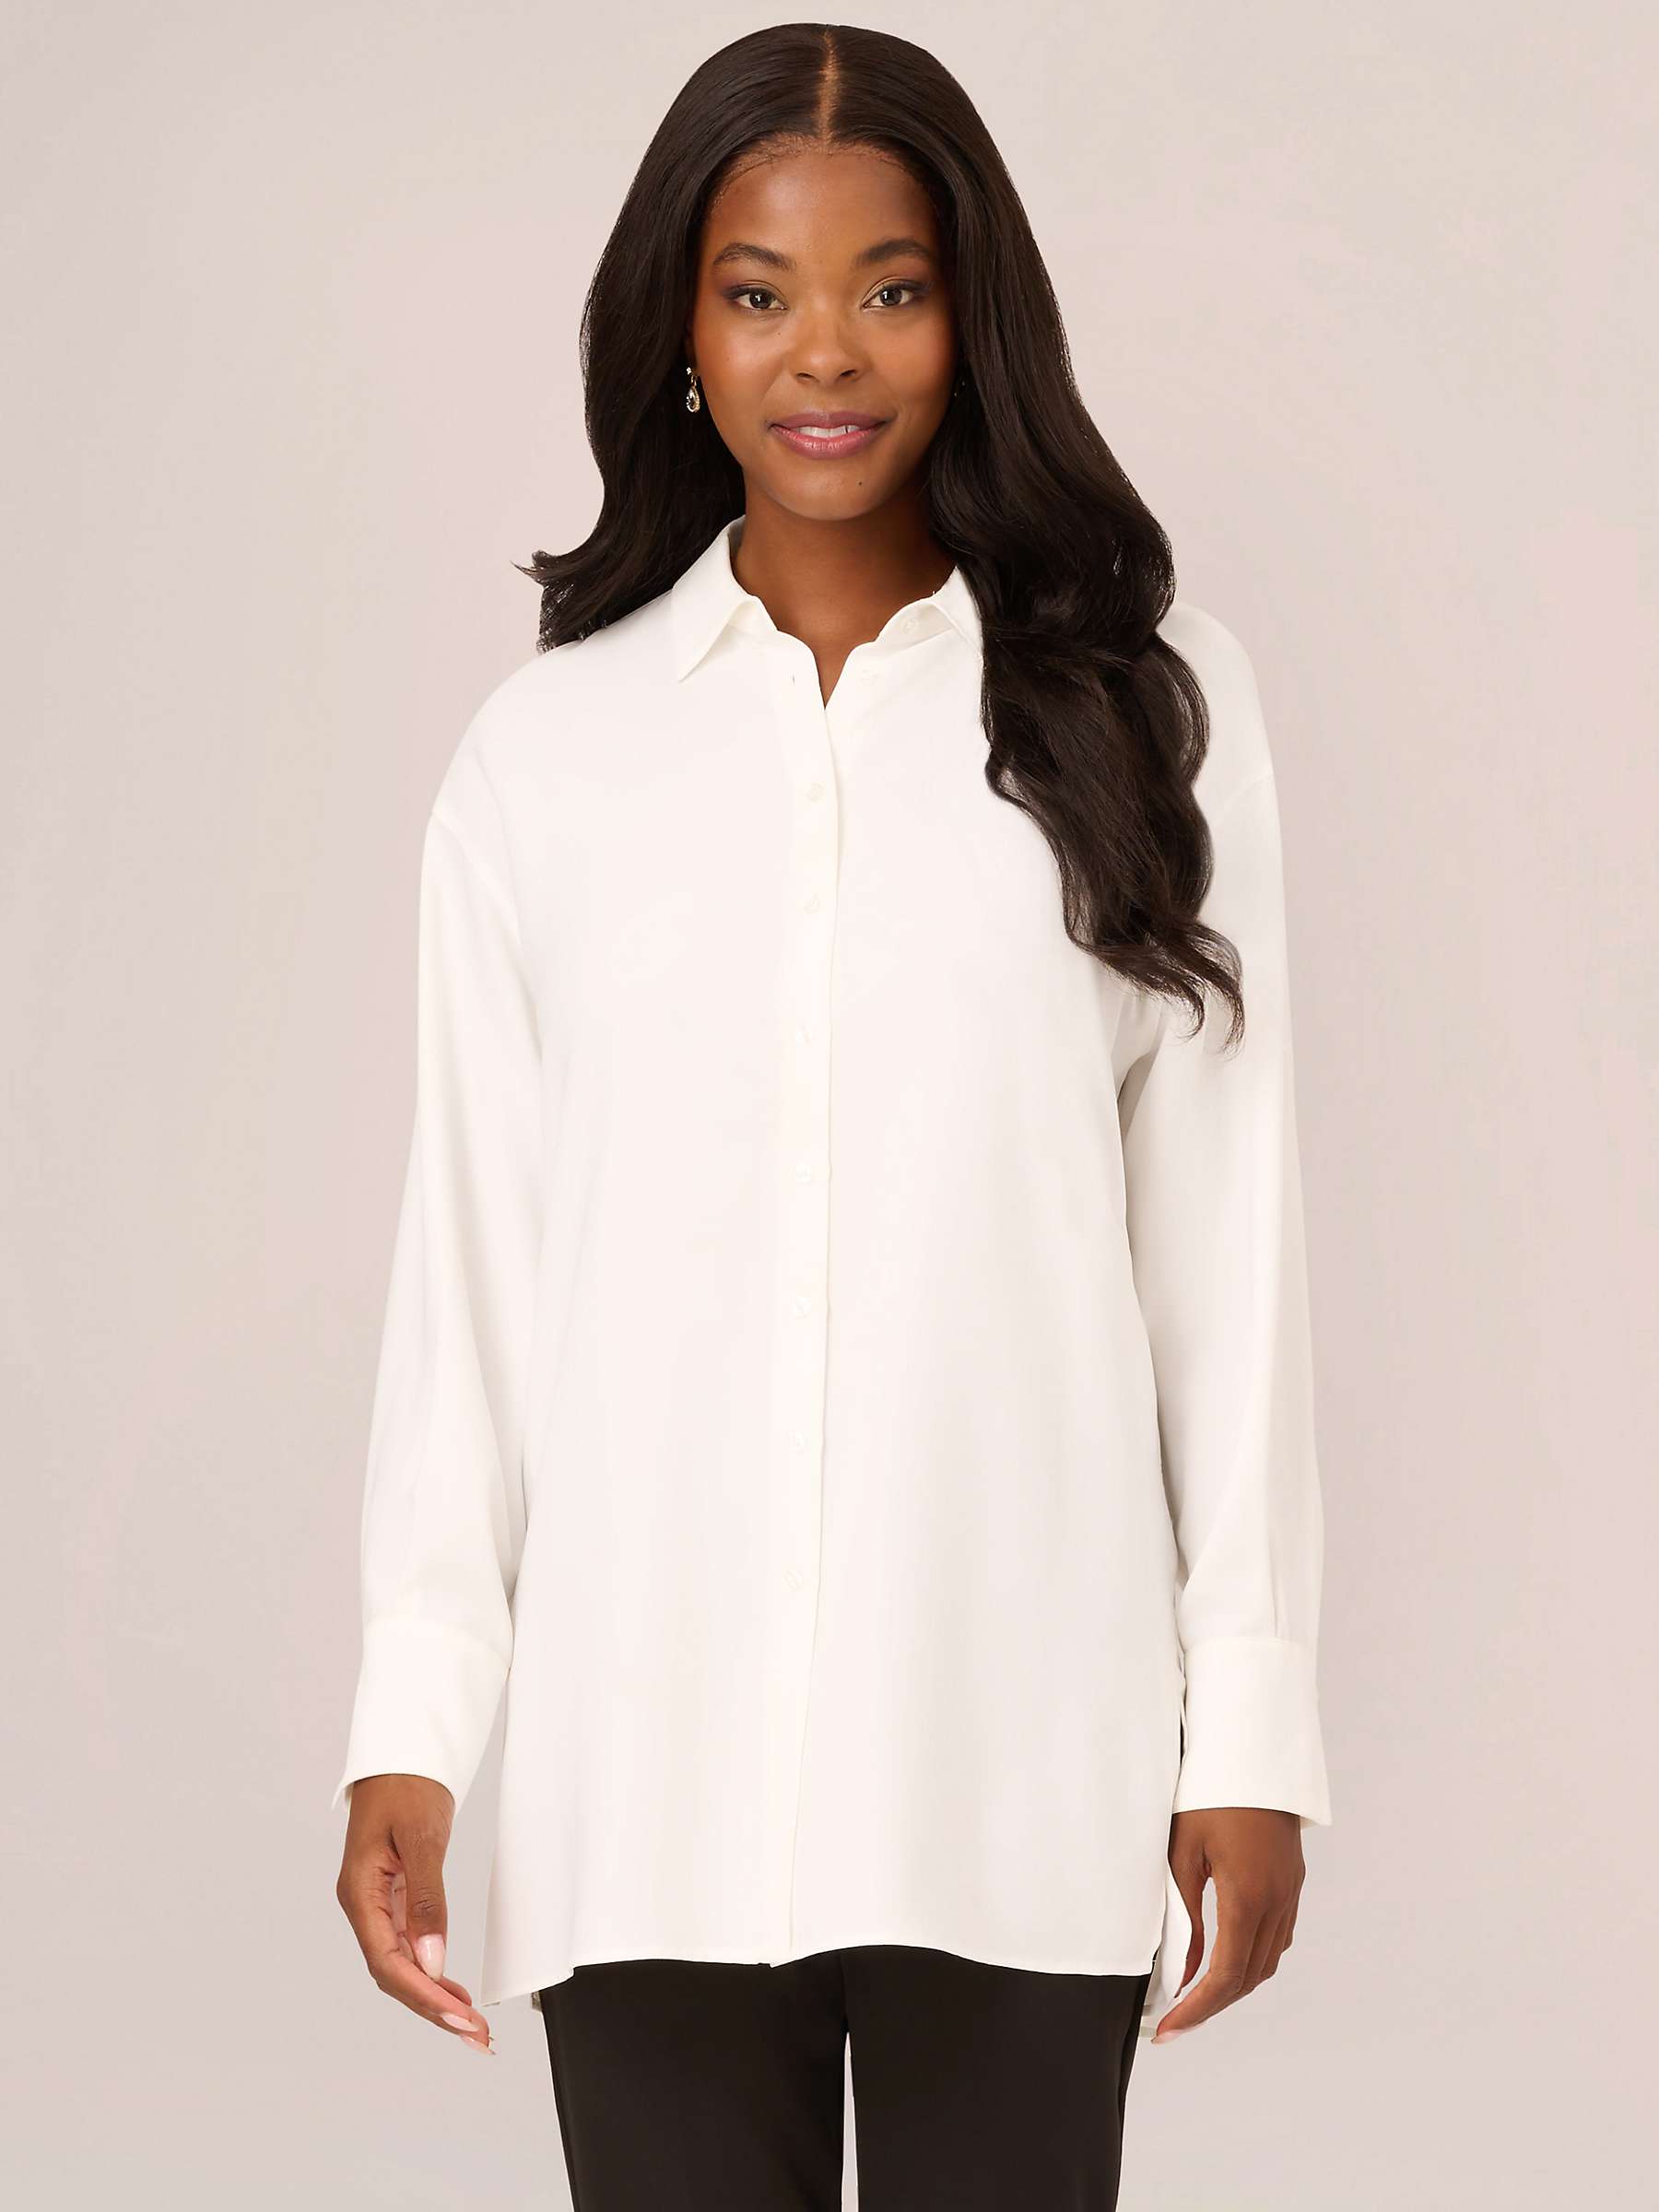 Buy Adrianna Papell Solid Button Front Shirt Online at johnlewis.com